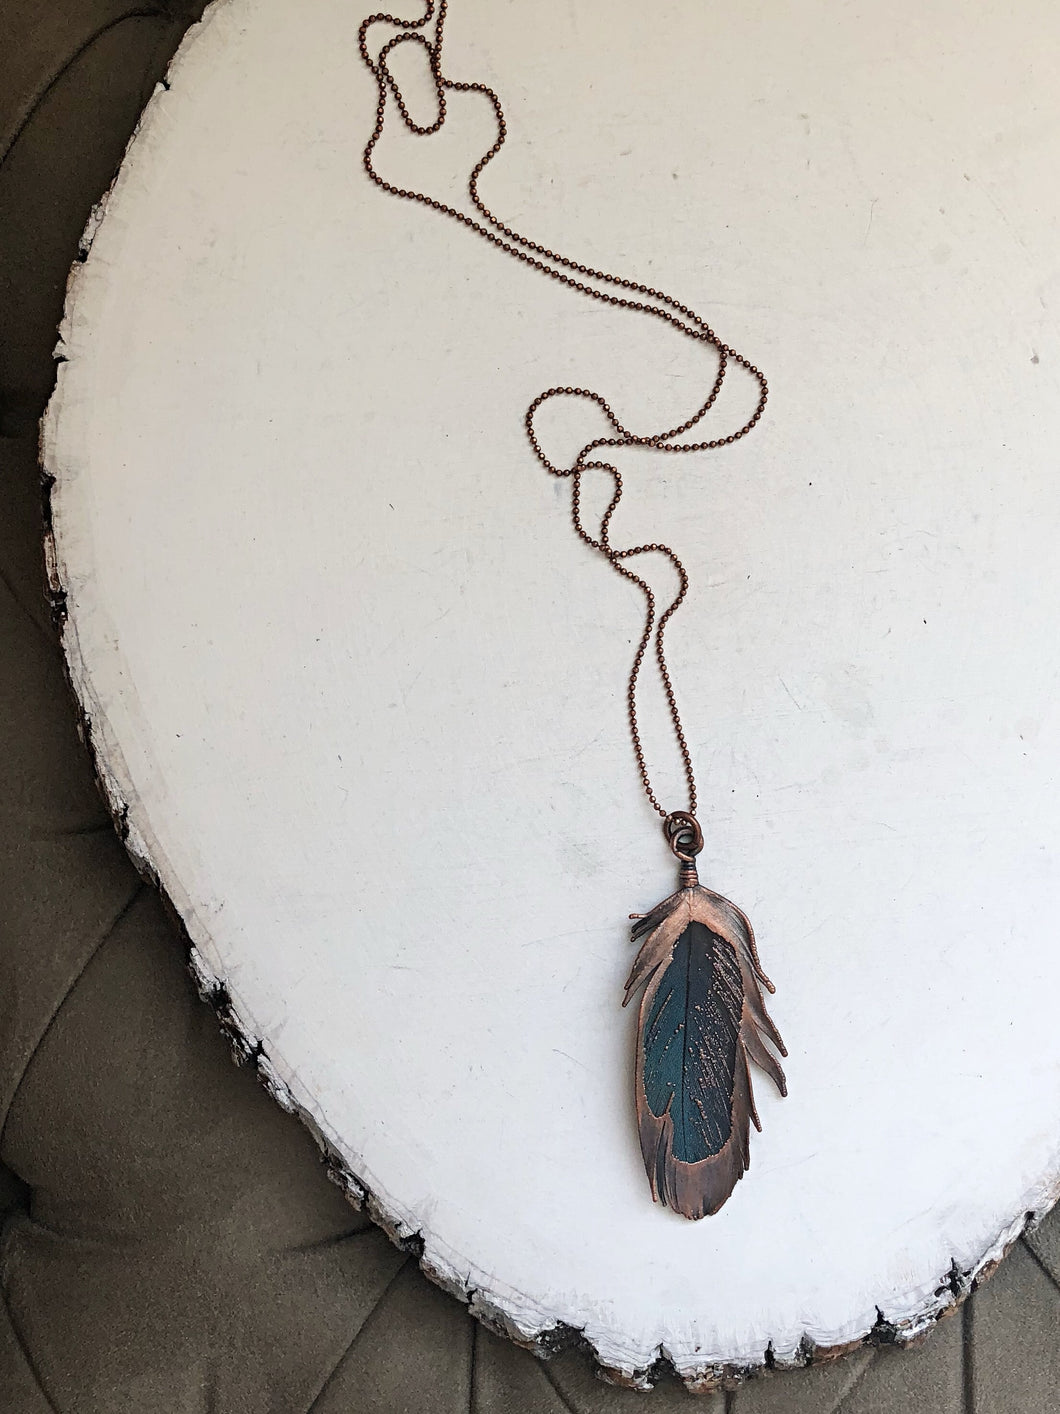 Electroformed Macaw Feather Necklace - Ready to Ship (5/17 Update)